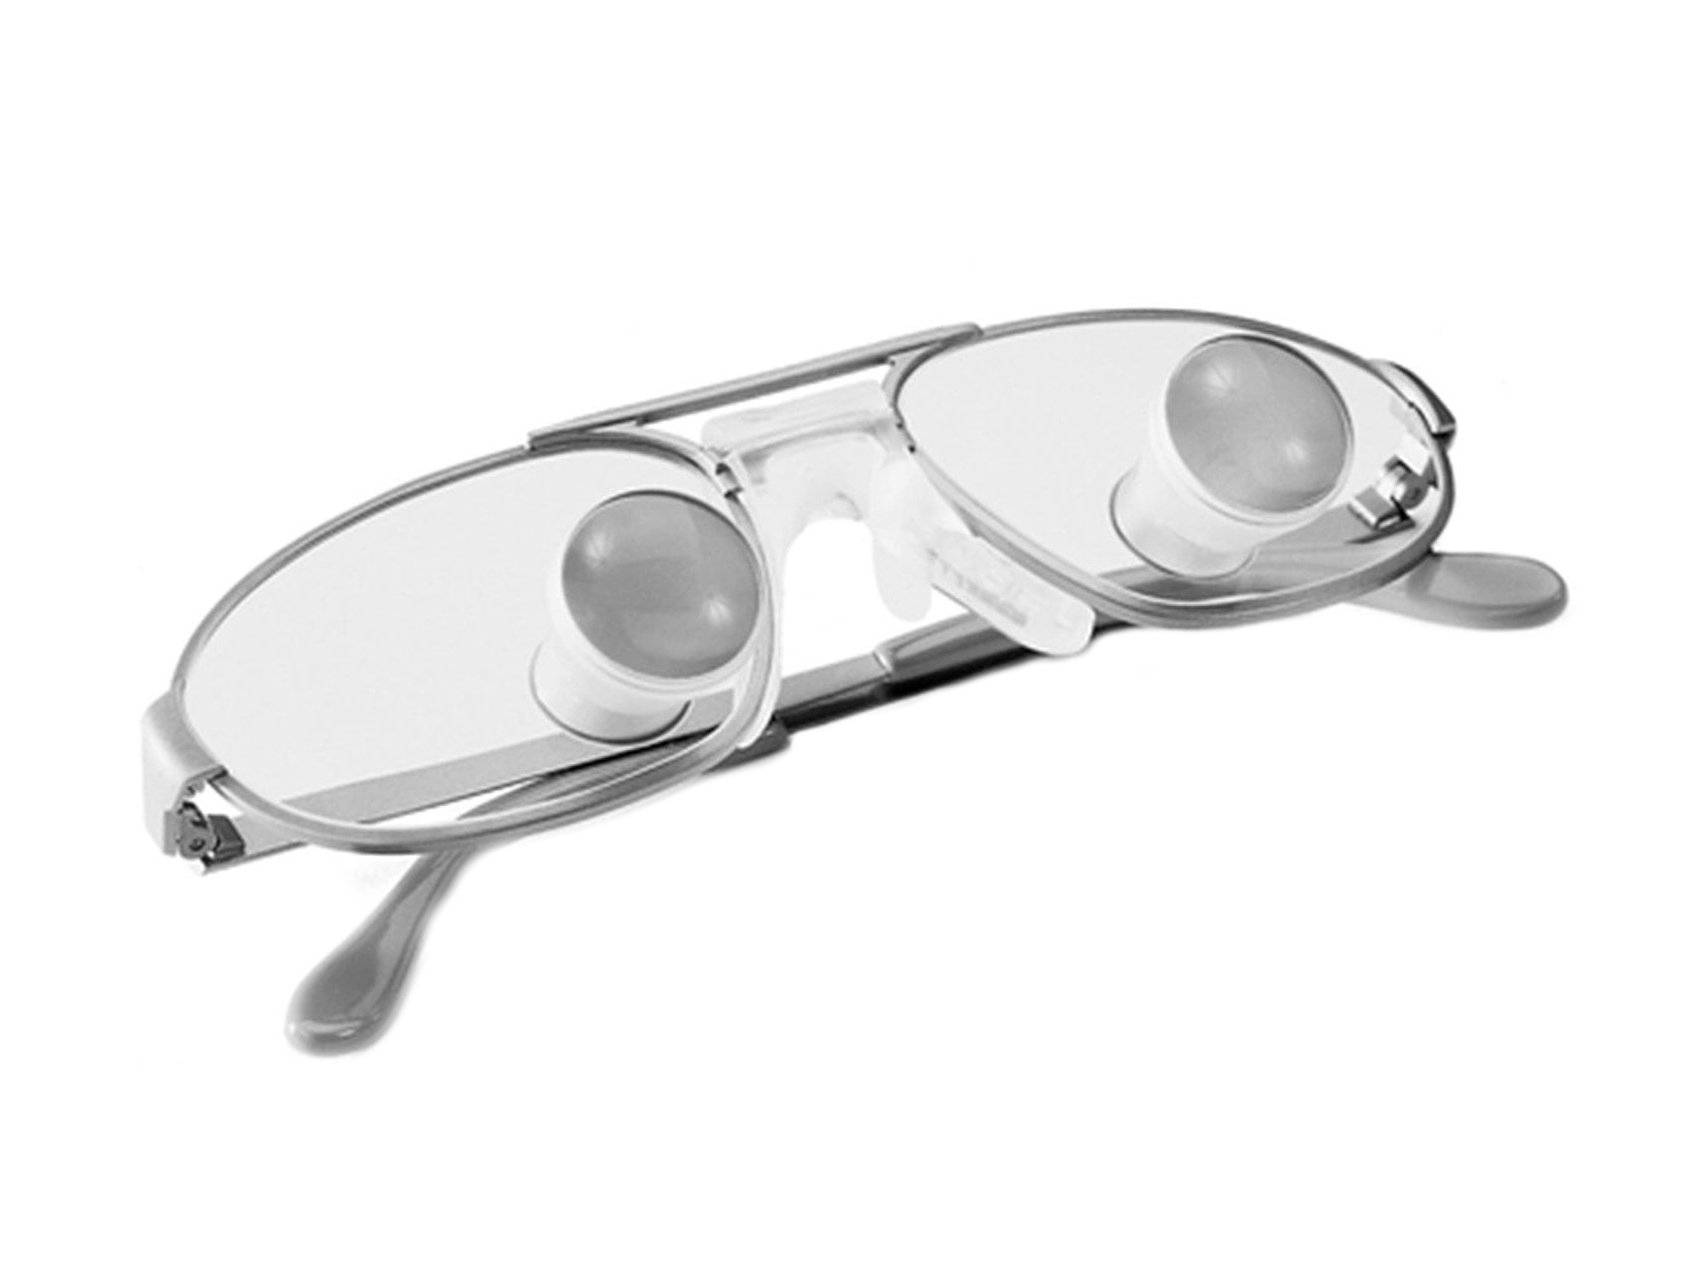 Spectacle lenses with a lace and ZEISS Teleloupe Spectacles mounted directly on the lenses.